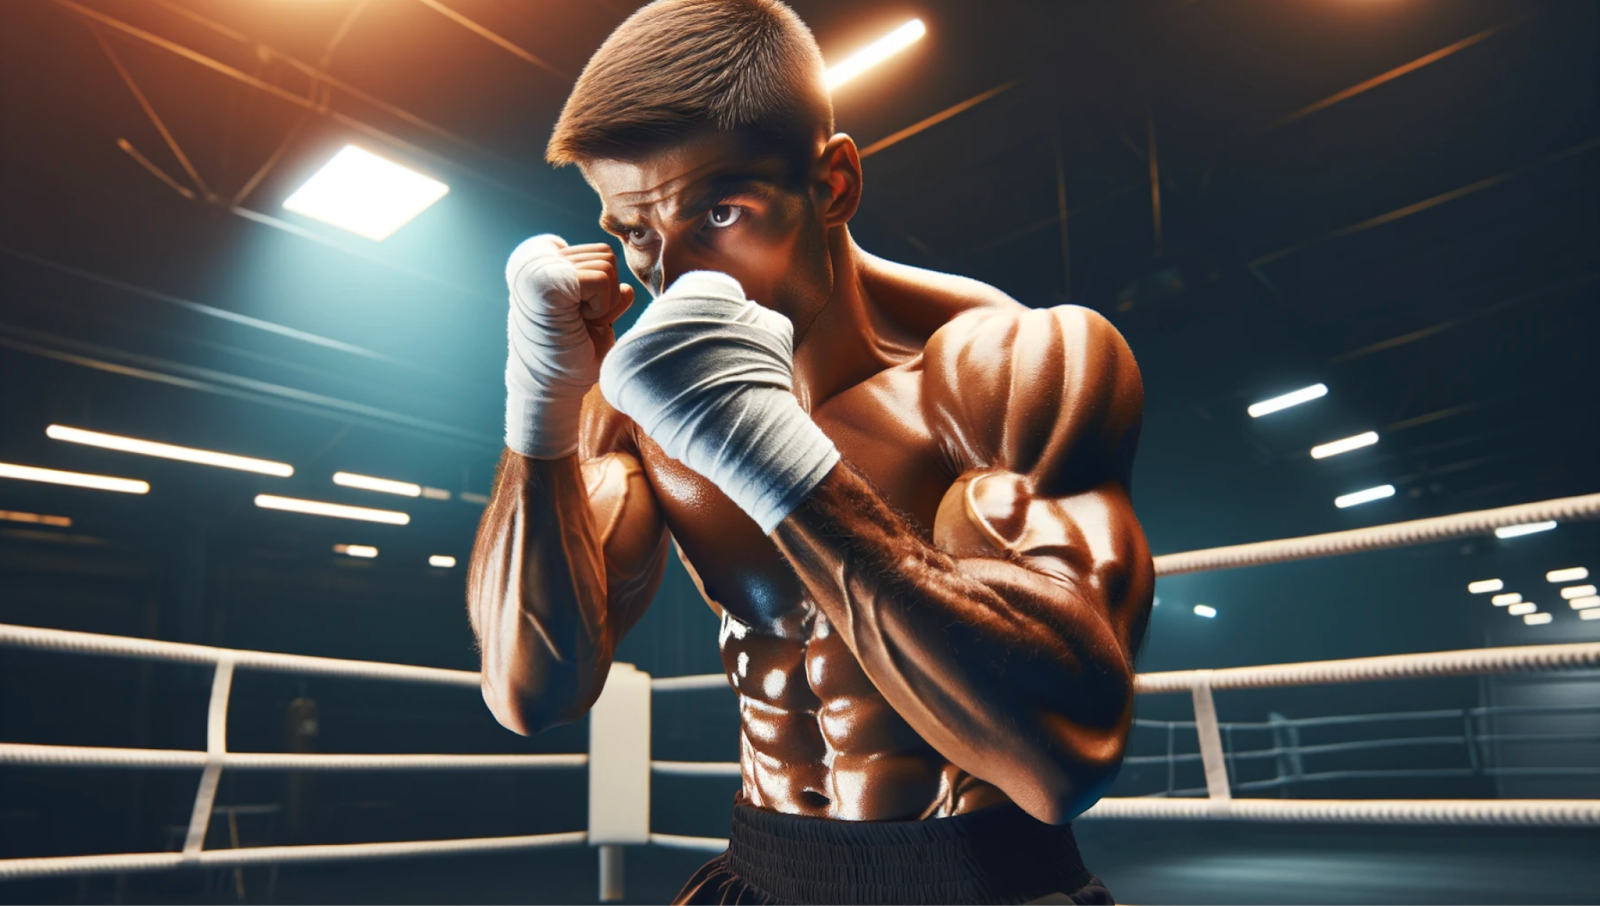 AI generated image of a man boxing with white gloves